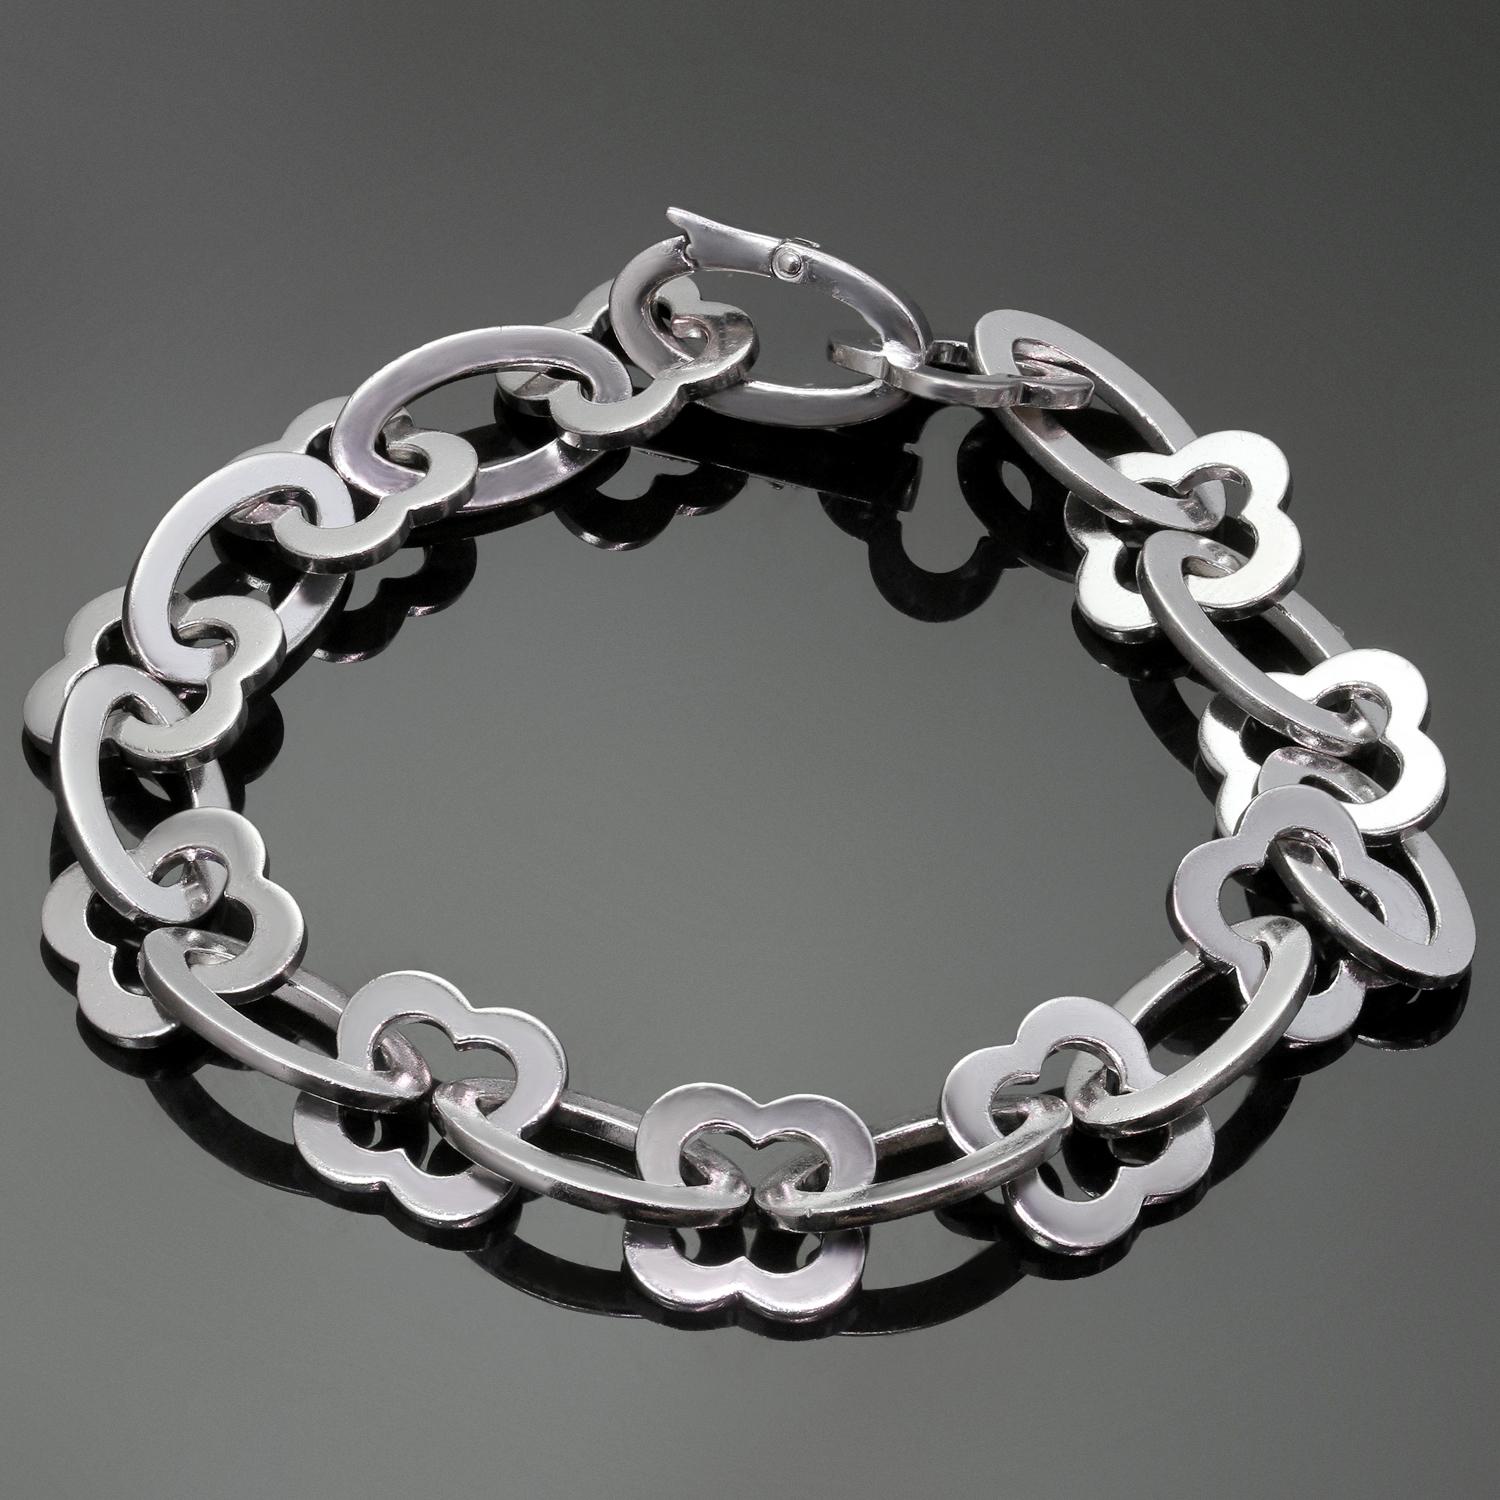 This classic bracelet from the iconic Byzantine Alhambra collection by Van Cleef & Arpels is crafted in 18k white gold and features a series of polished gold openwork Alhambra links, spaced by polished gold oval links. Made in France circa 1990s.